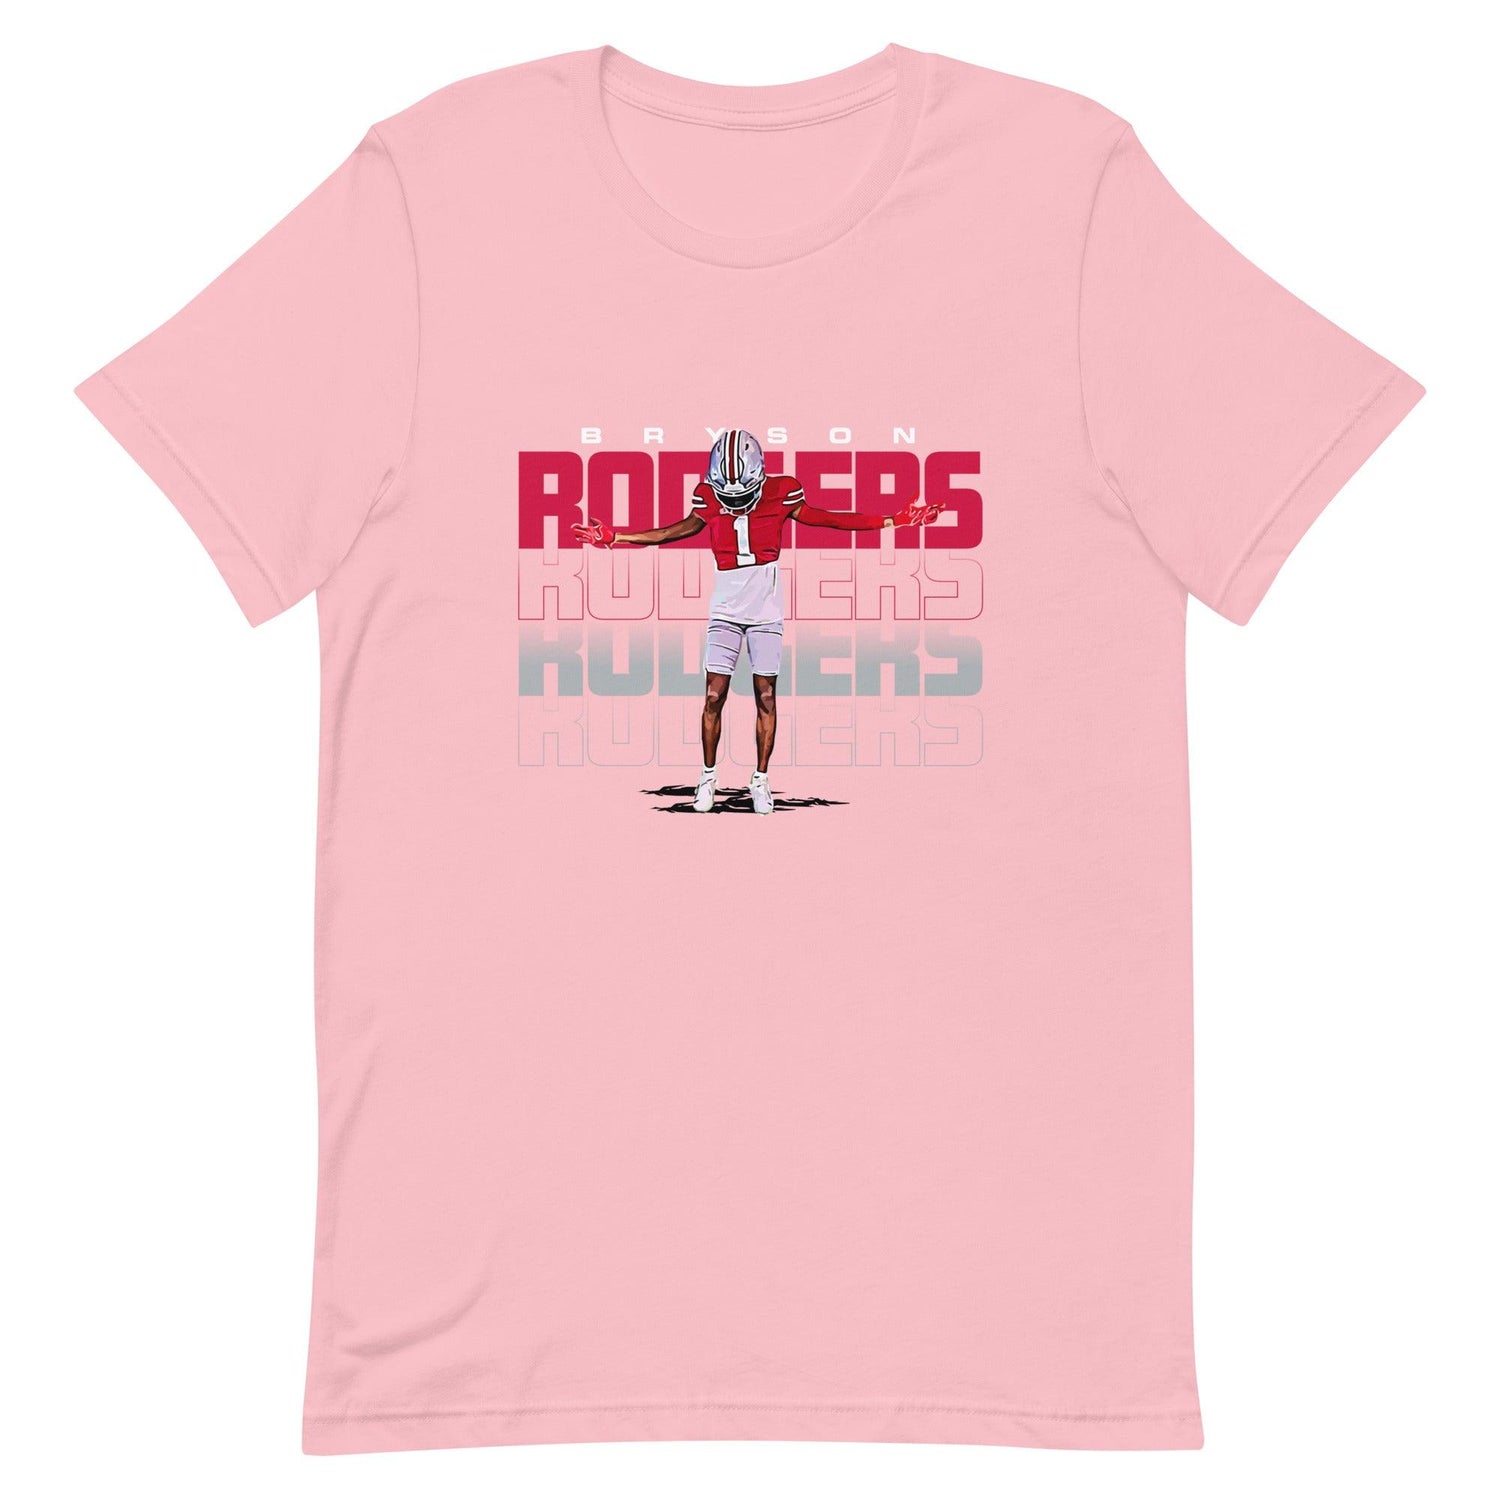 Bryson Rodgers "Gameday" t-shirt - Fan Arch